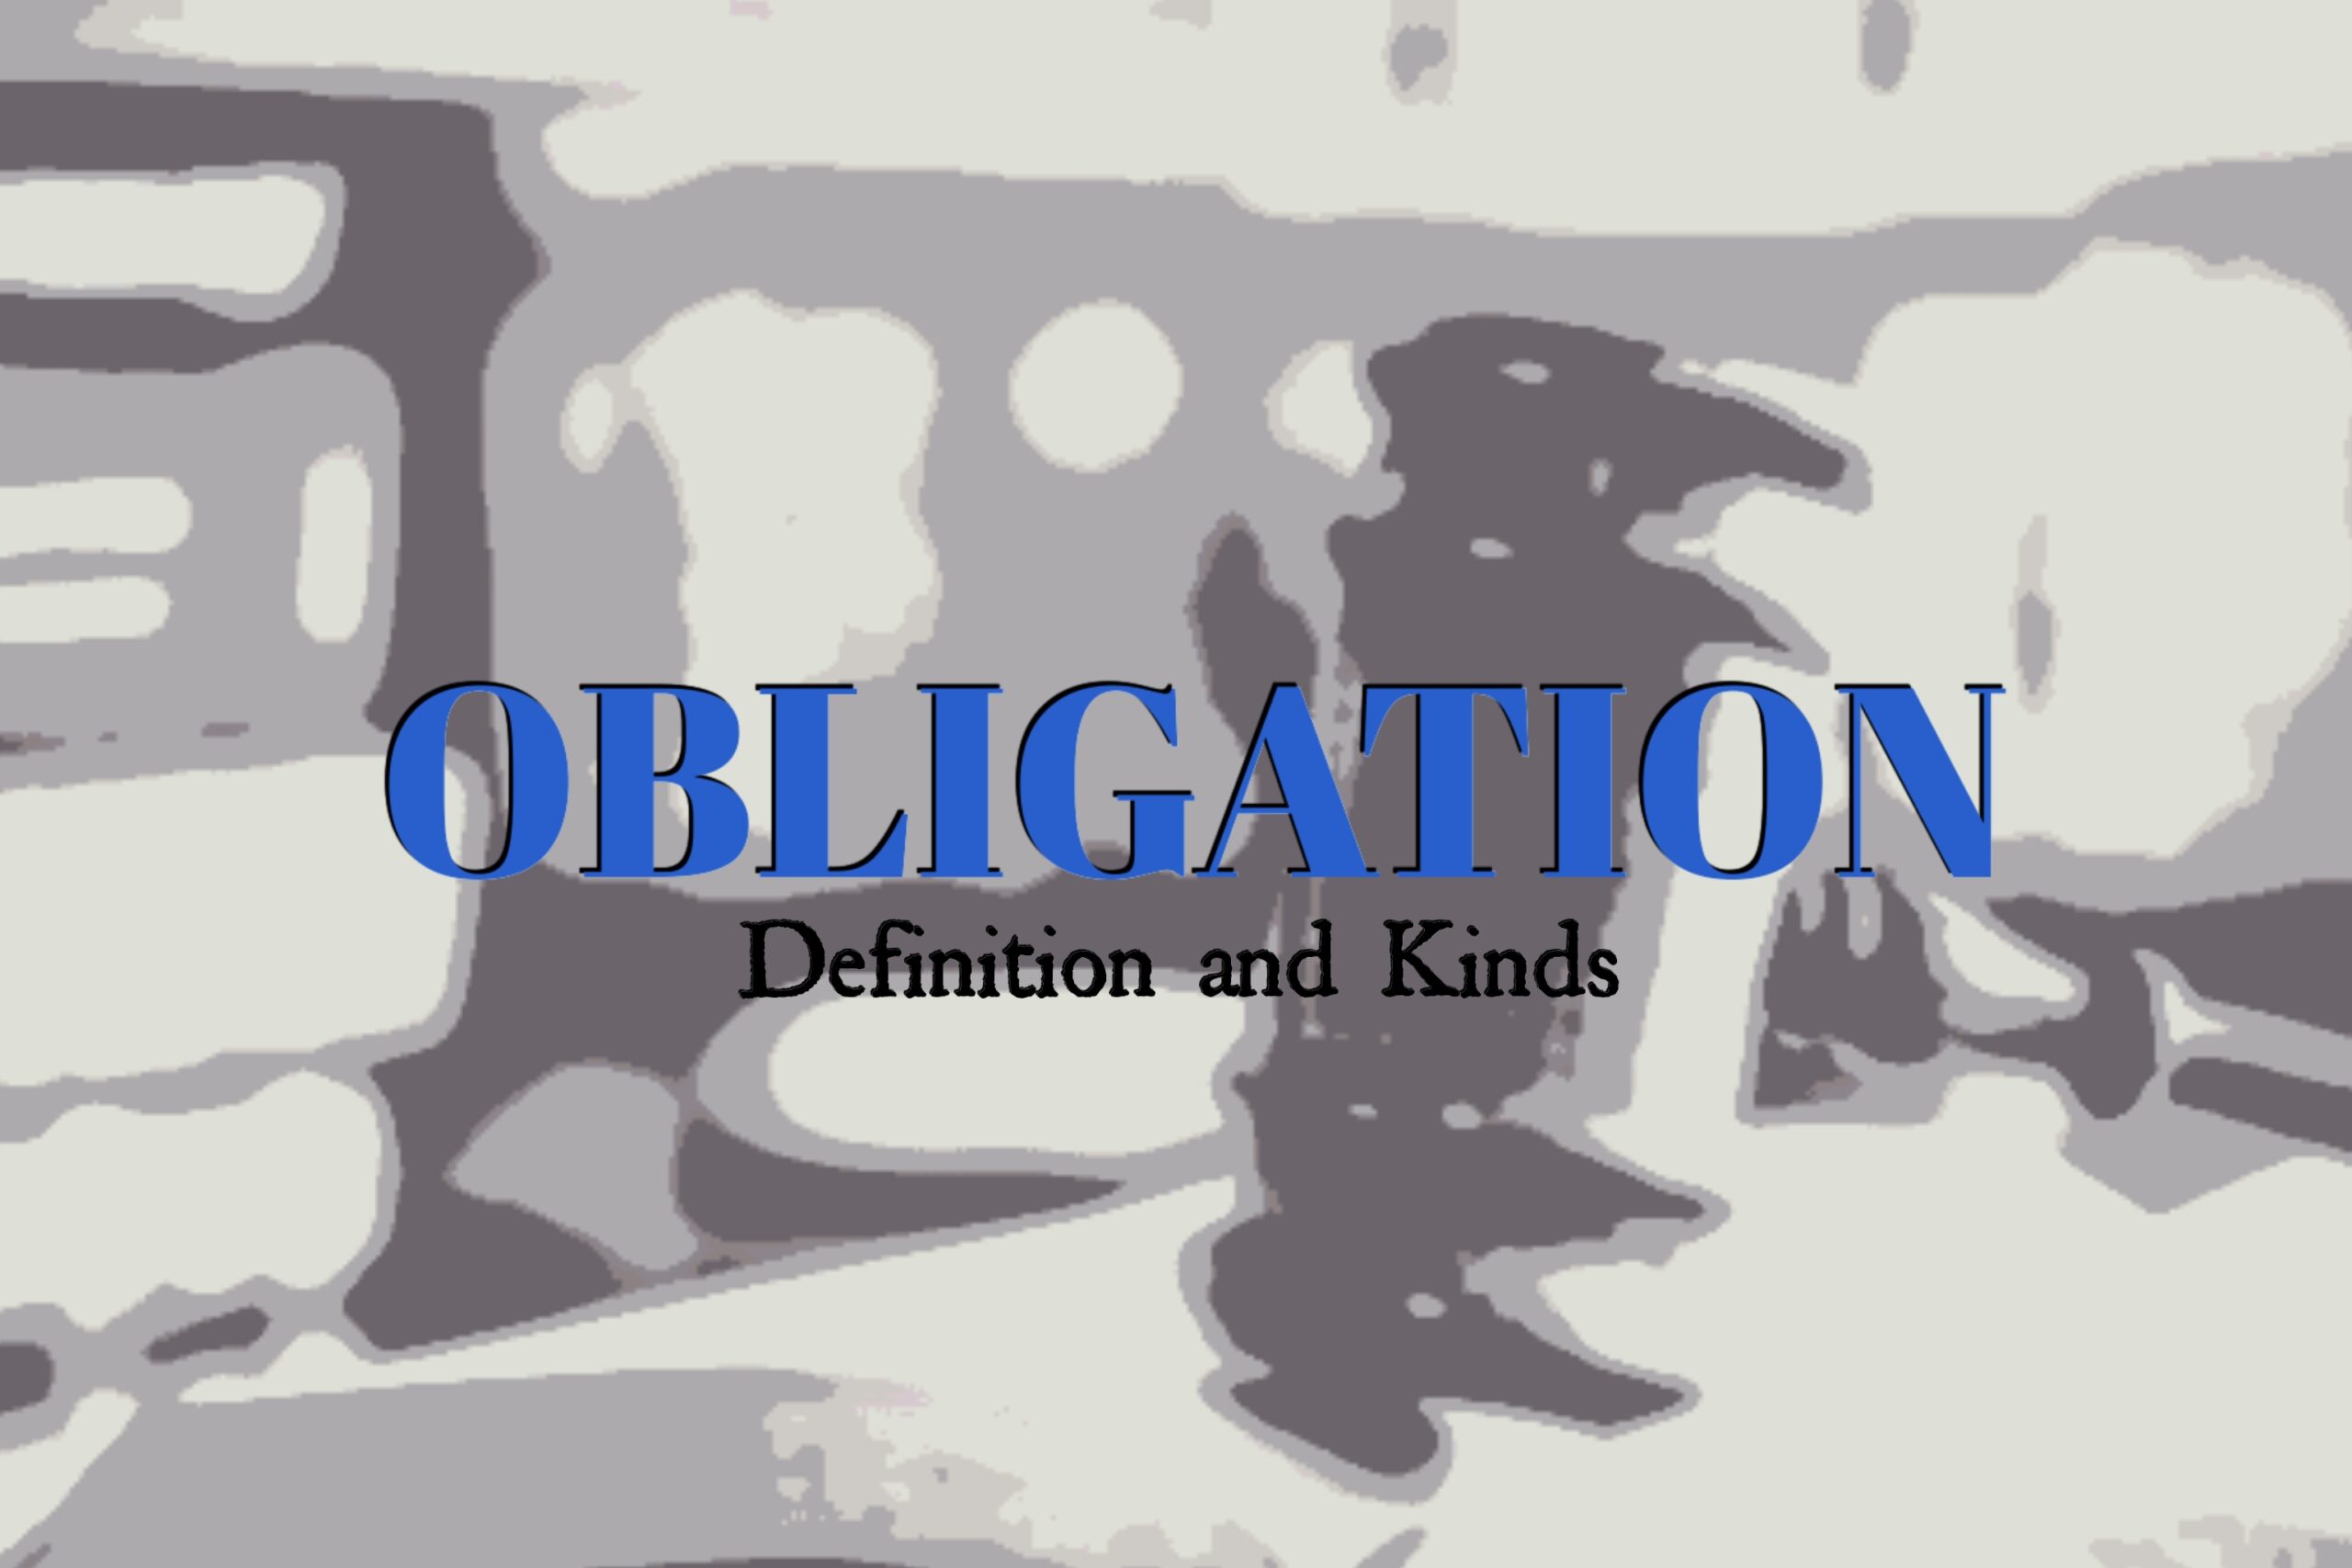 the presentation of an obligation is also known as